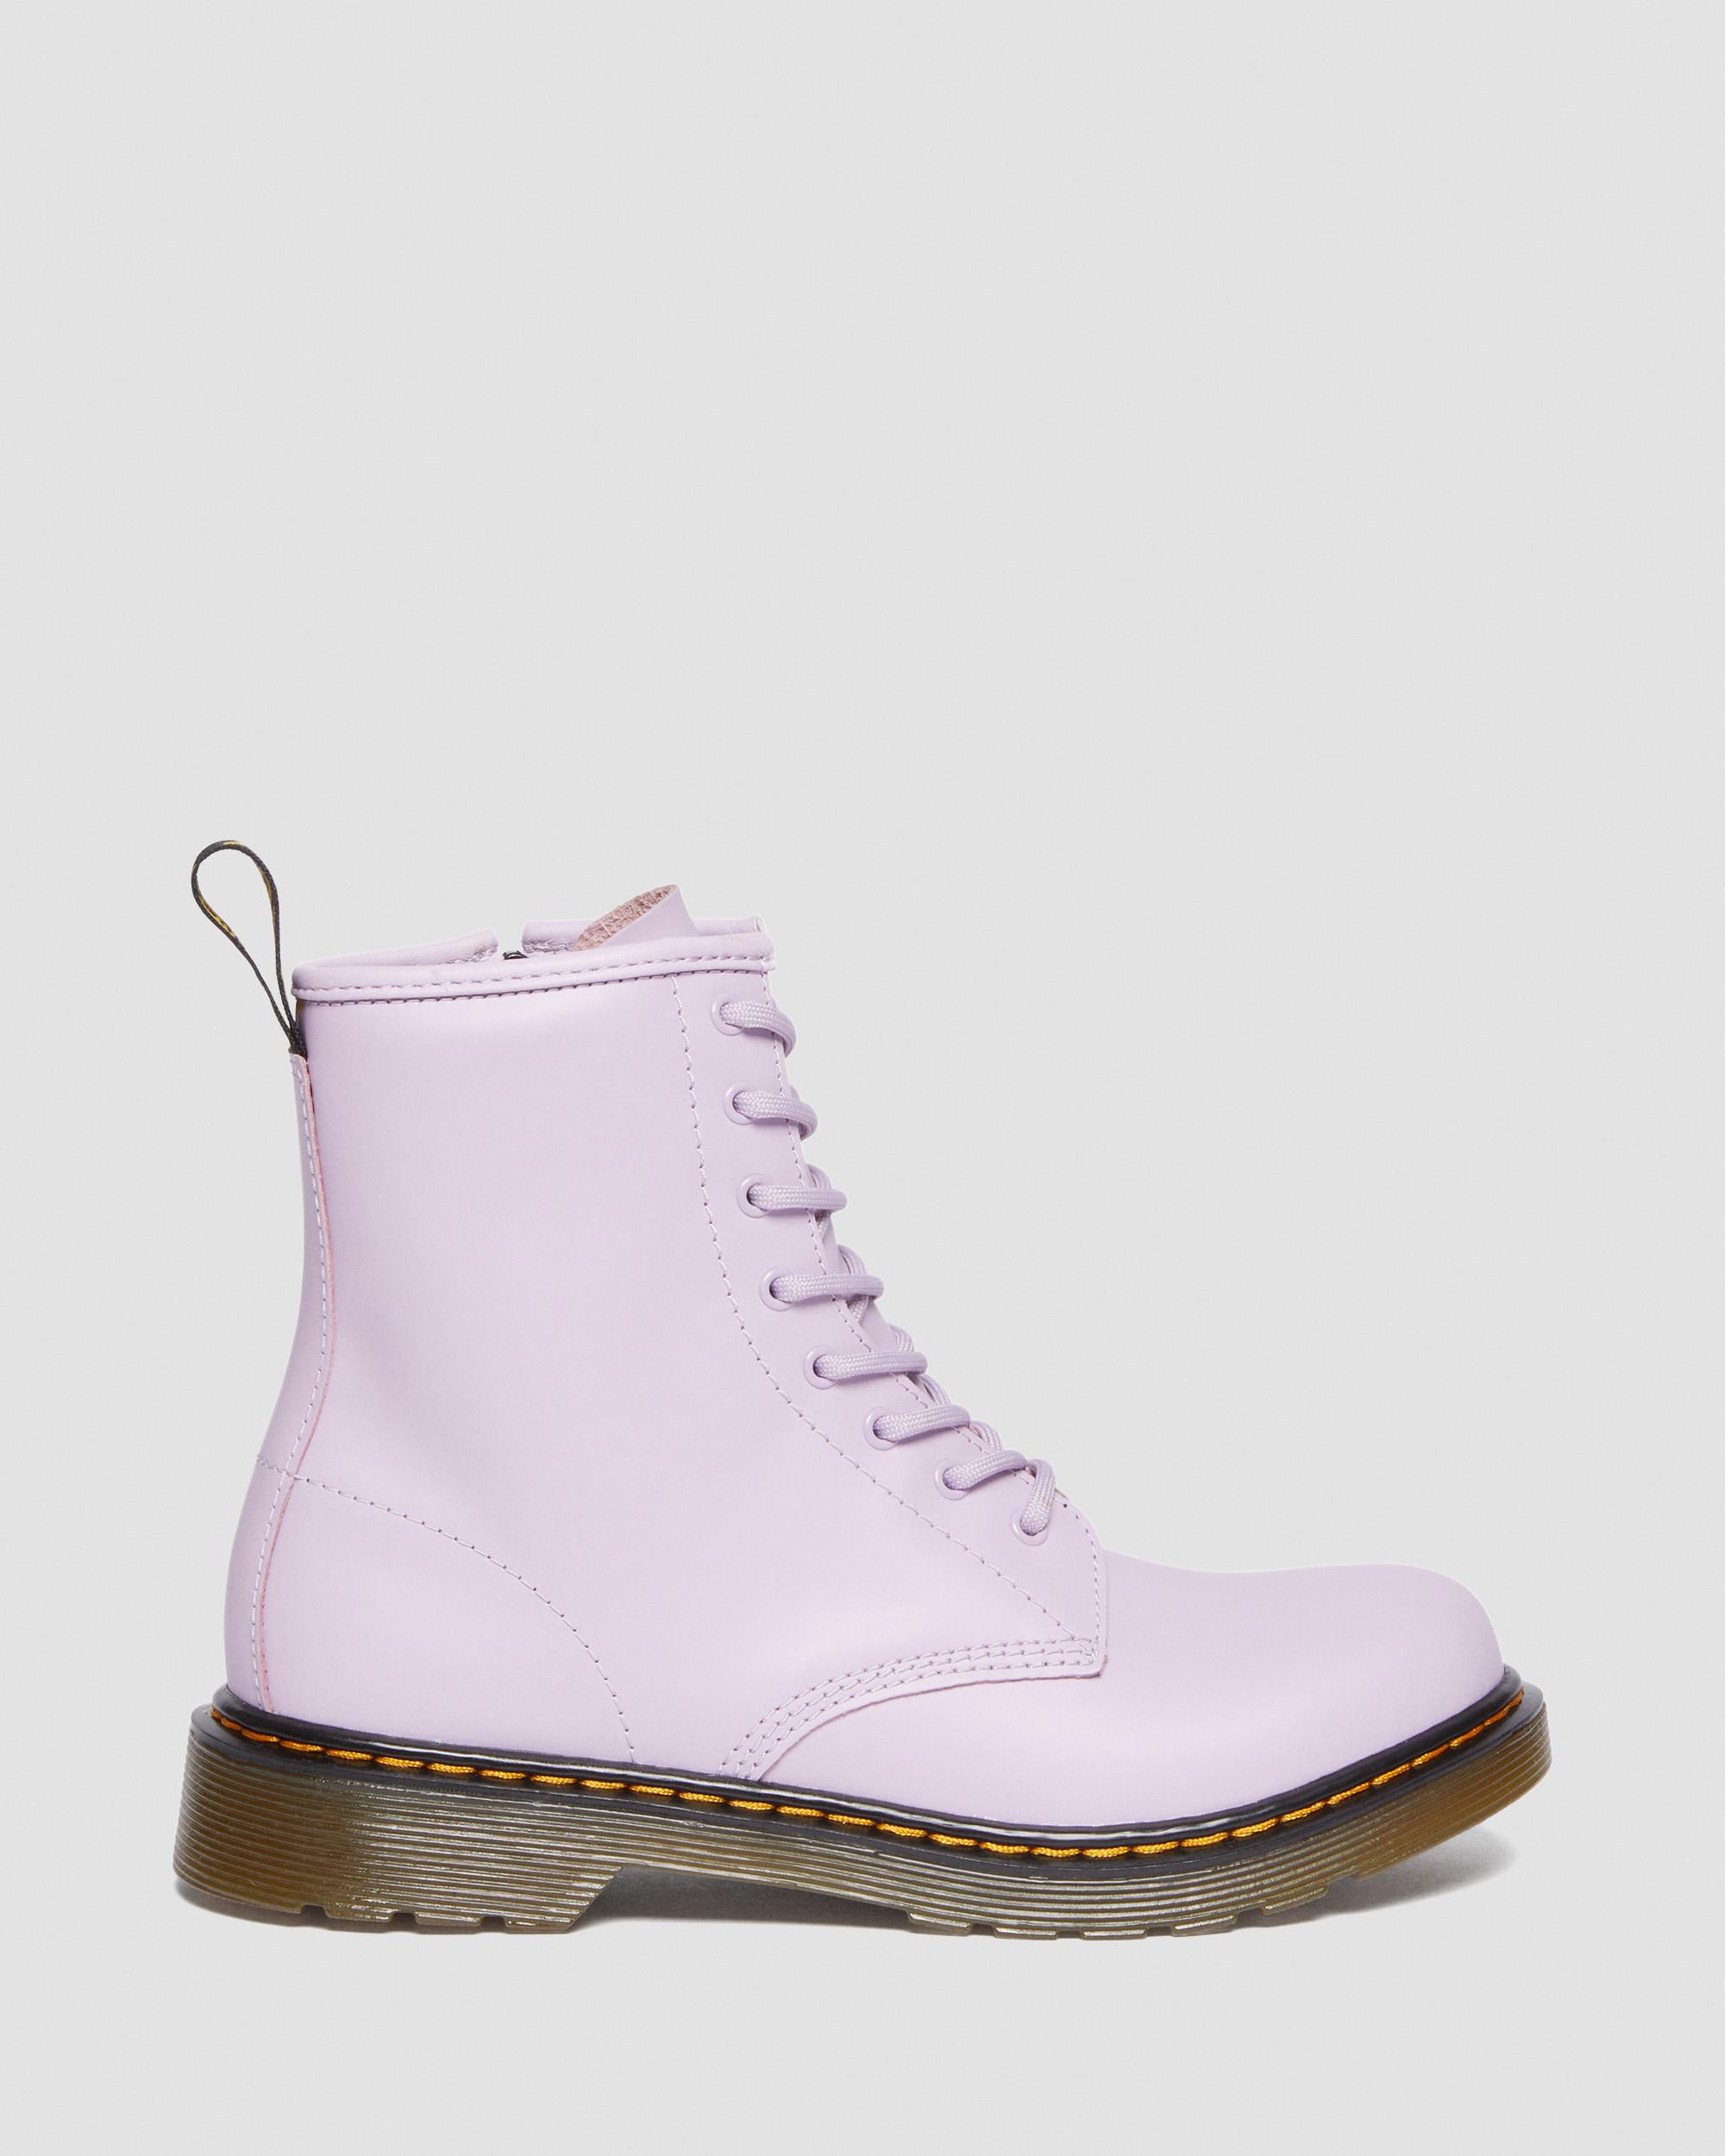 Youth 1460 Romario Leather Lace Up Boots in Lilac | Dr. Martens